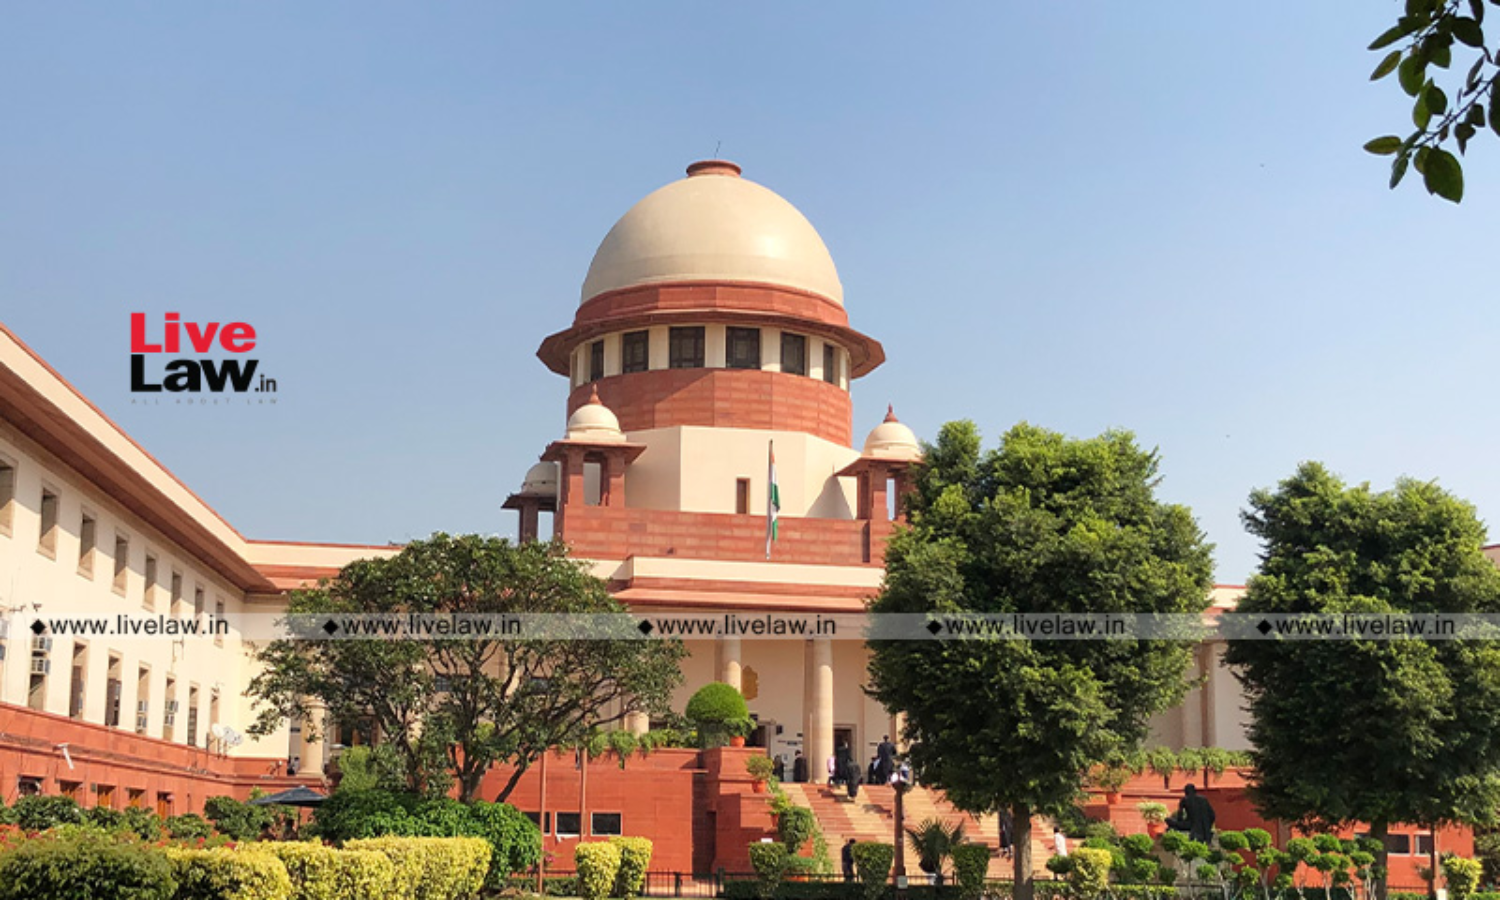 Can't Direct Relocation Of Bar If Distance From Temple Meets Statutory  Limit : Supreme Court